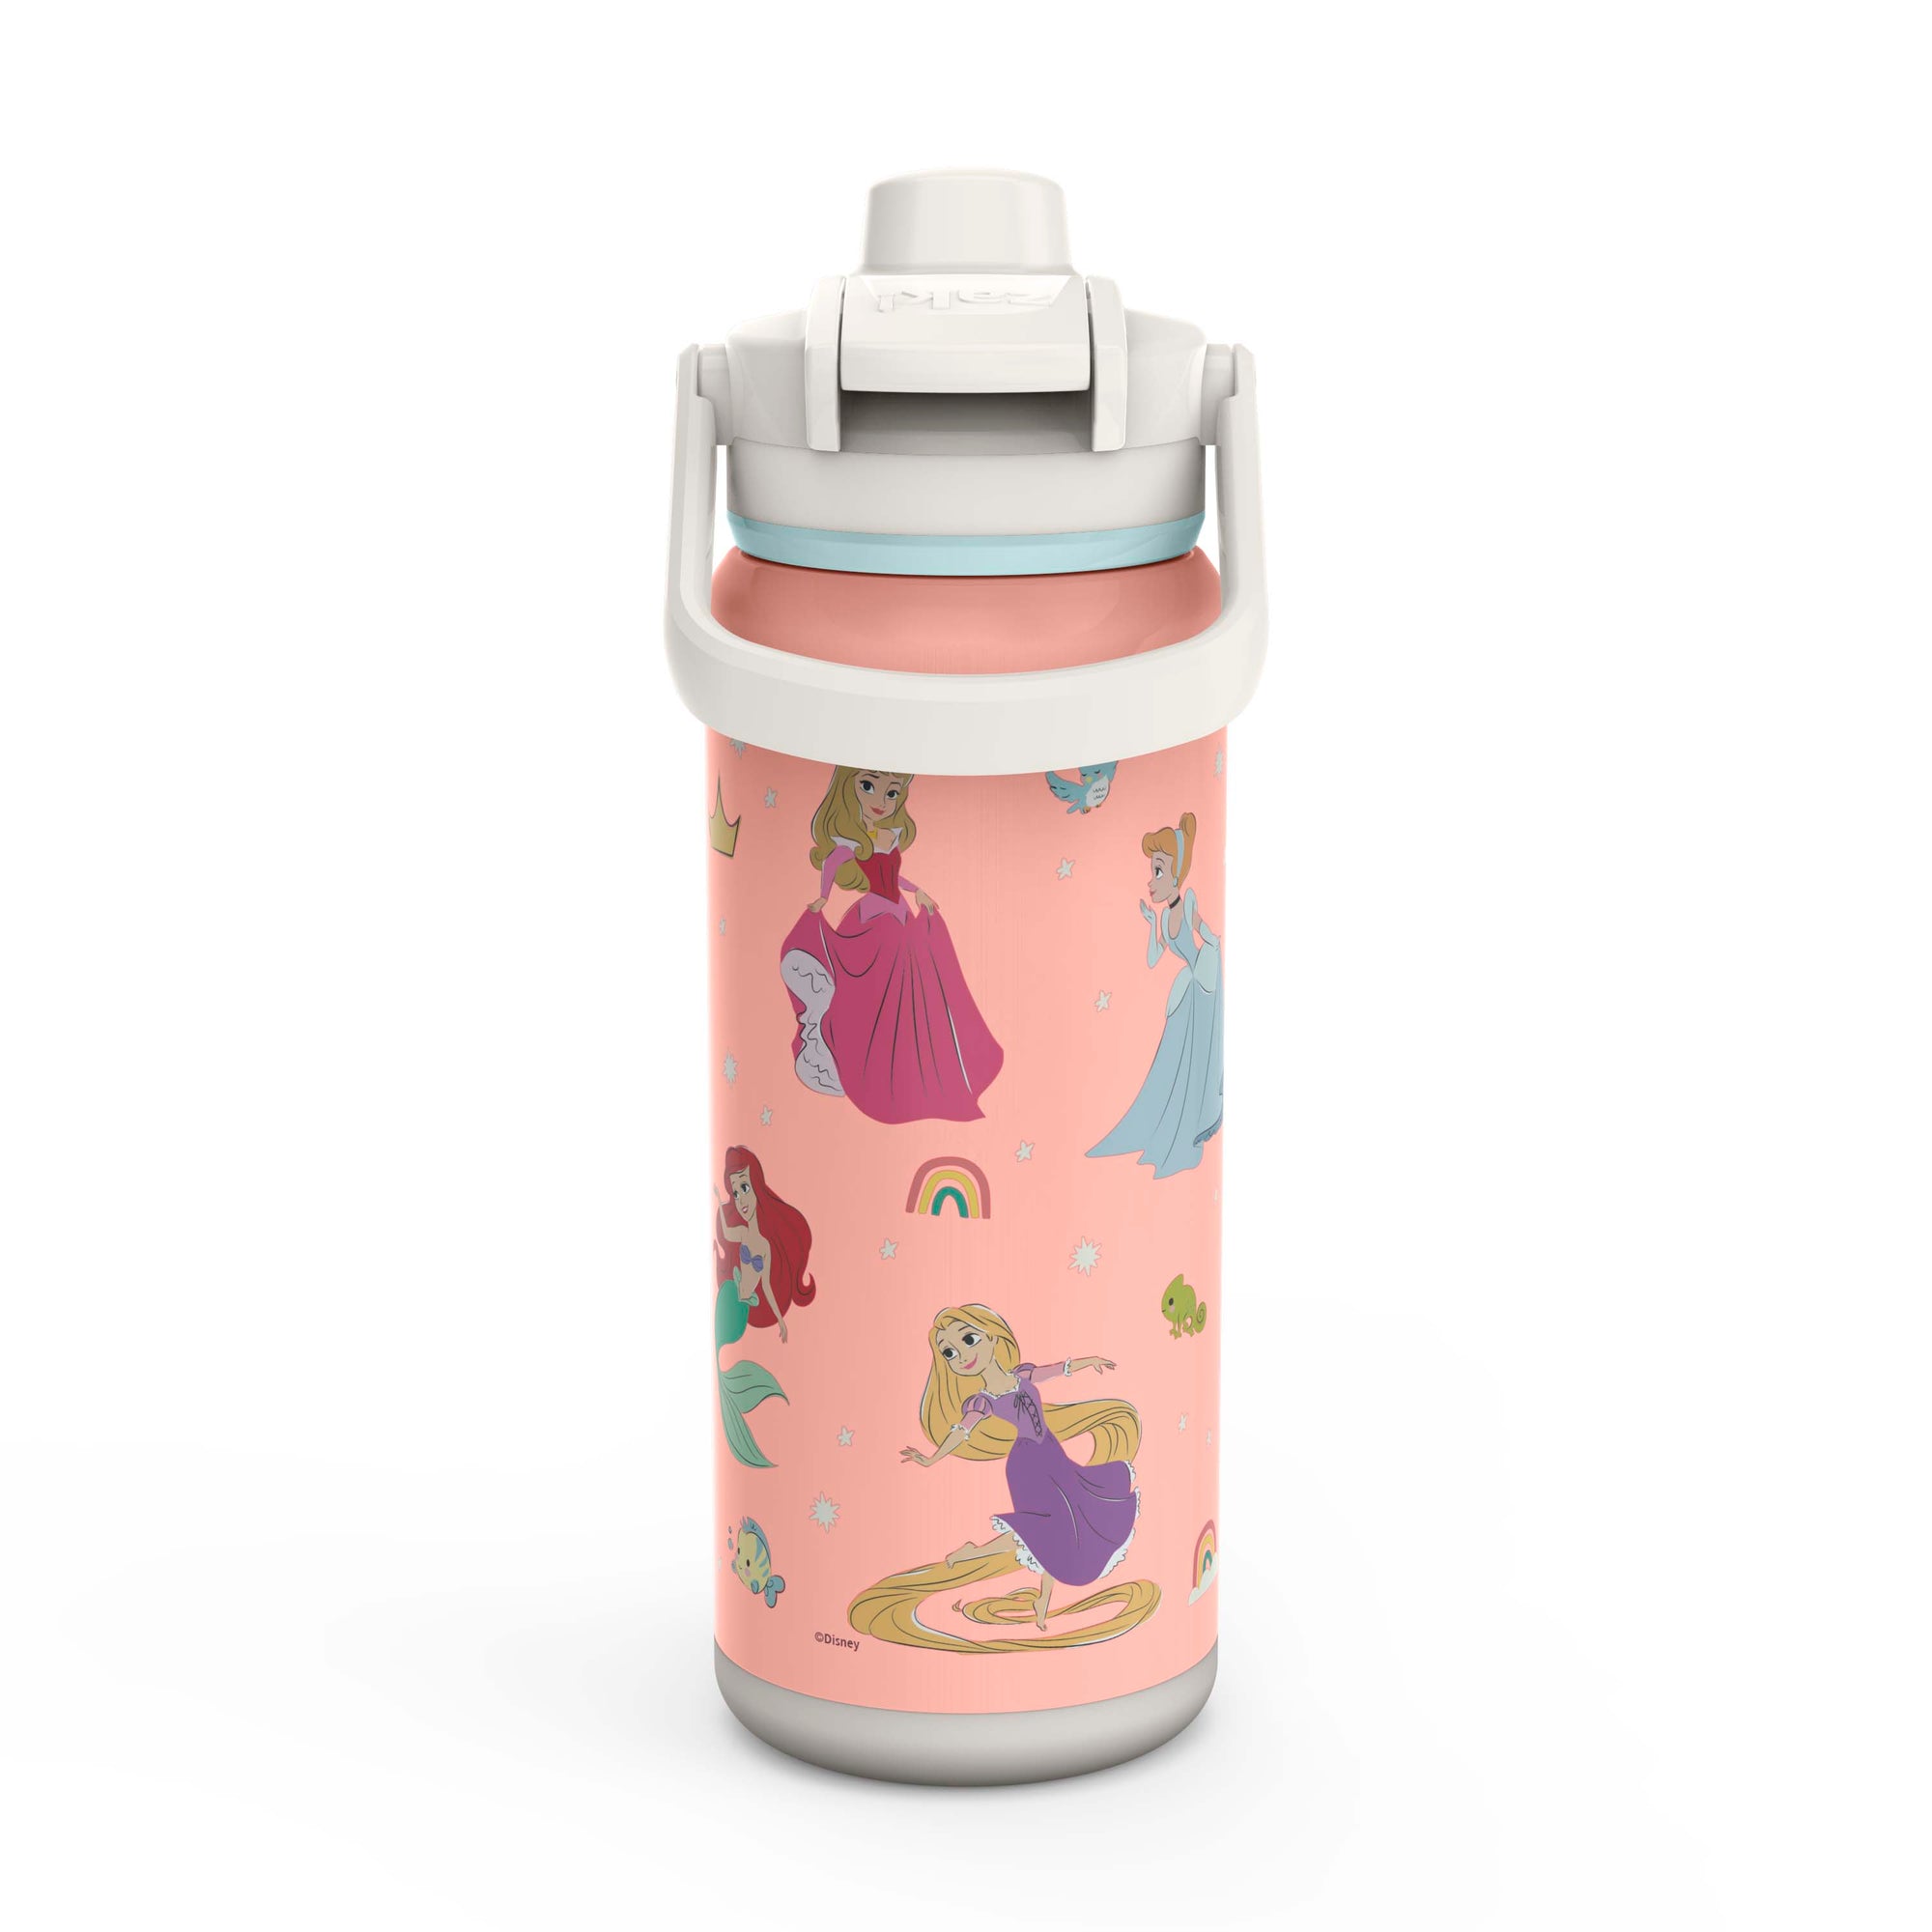 Disney Princess Beacon Stainless Steel Insulated Kids Water Bottle with Covered Spout, 20 Ounces